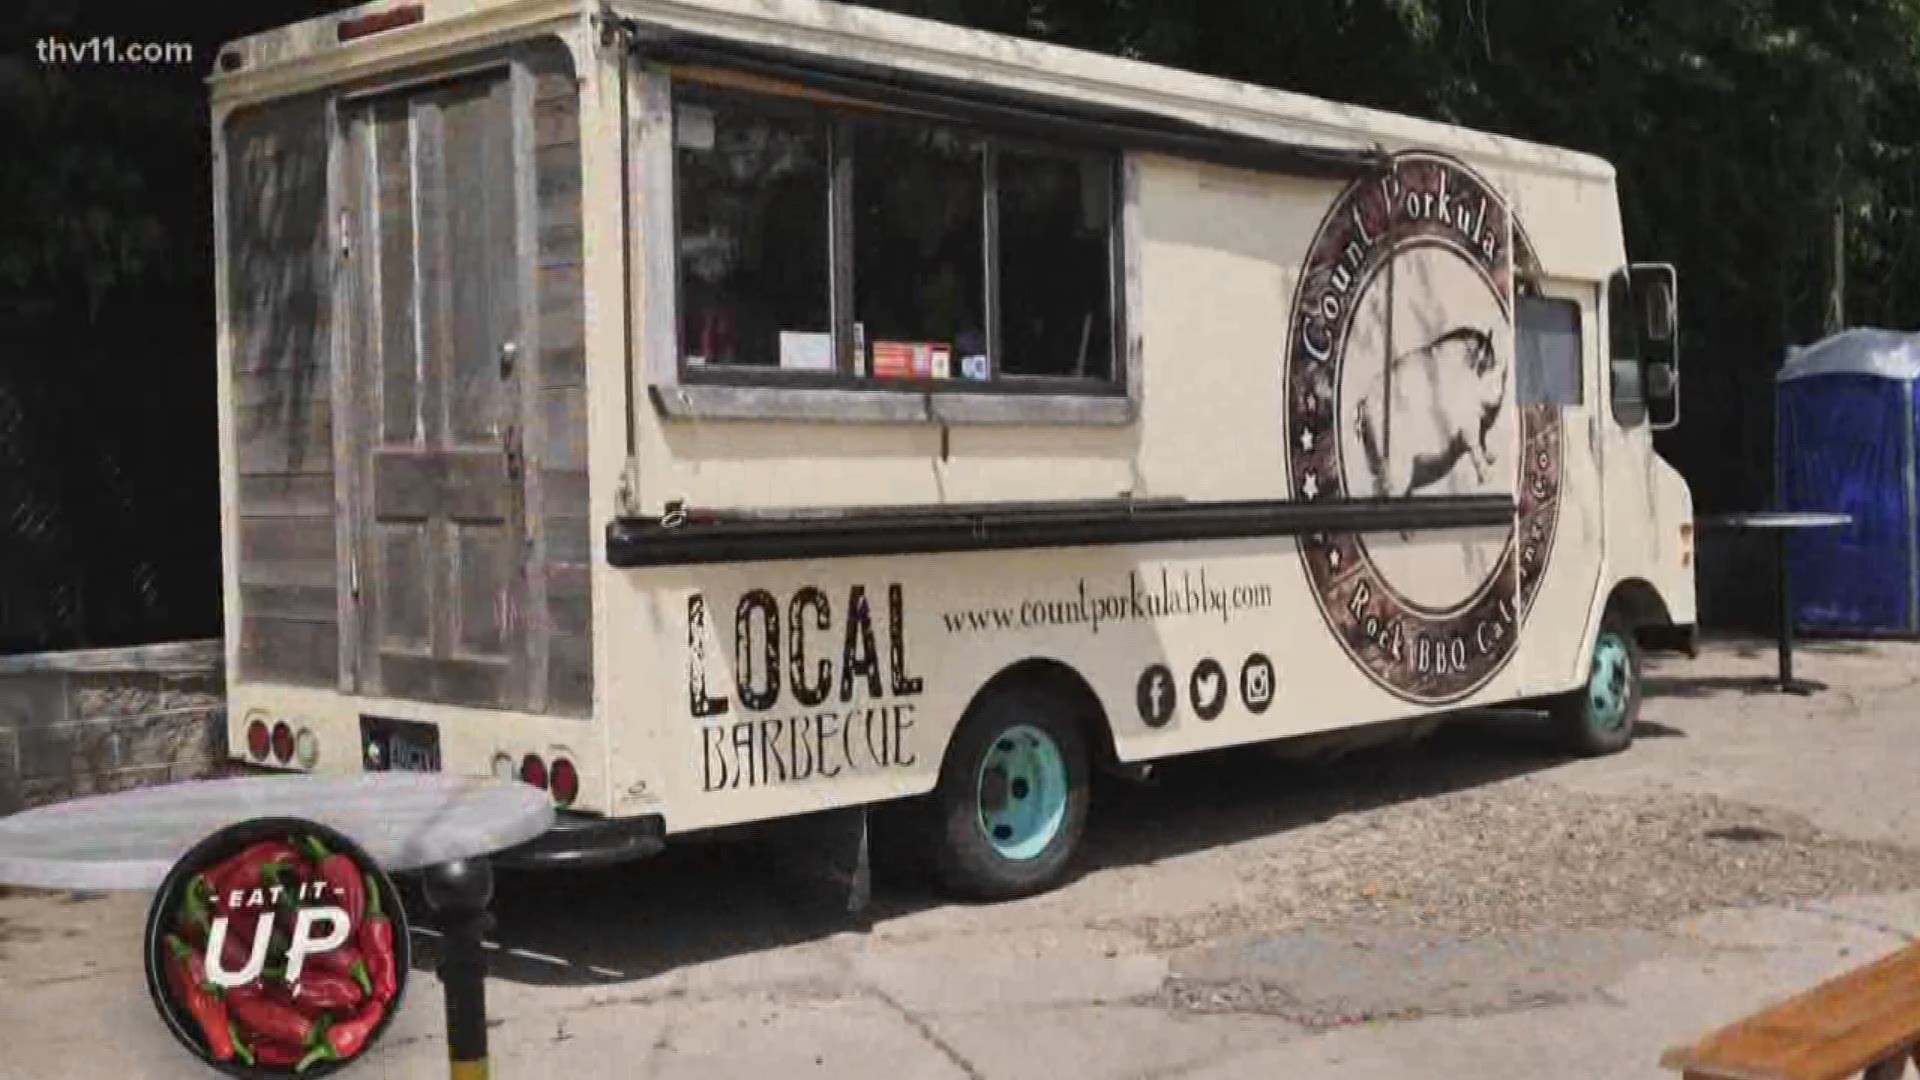 Count Porkula BBQ was established in 2008 by Kelly Lovell and Walt Todd. After growing in popularity they created the Count Porkula food truck which became a hit across central Arkansas.